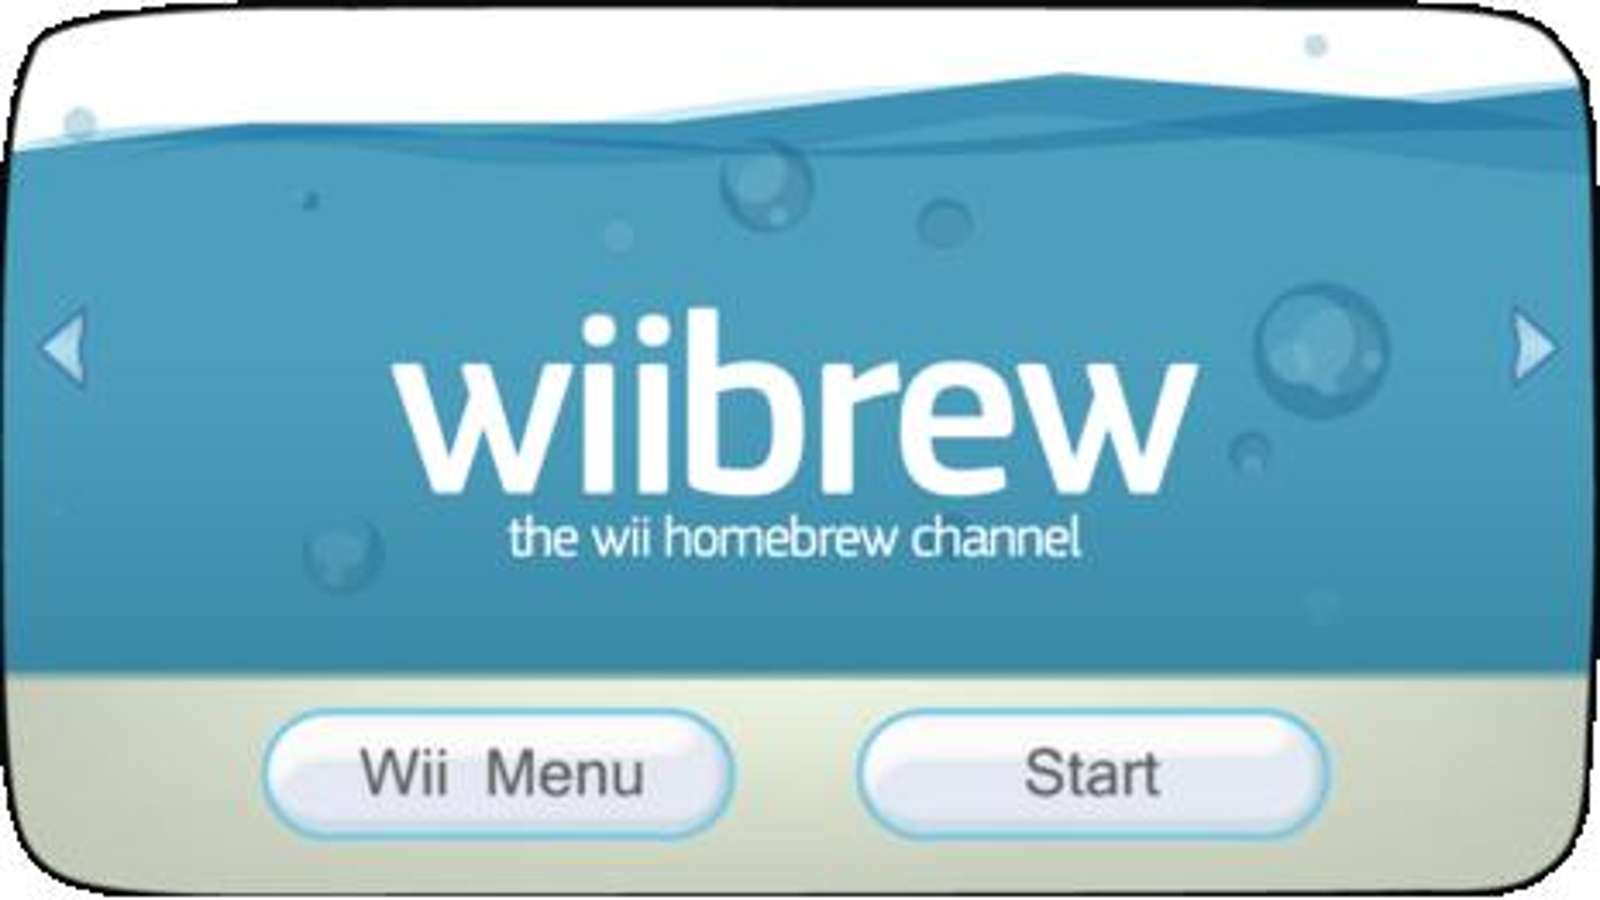 the homebrew channel wii apps